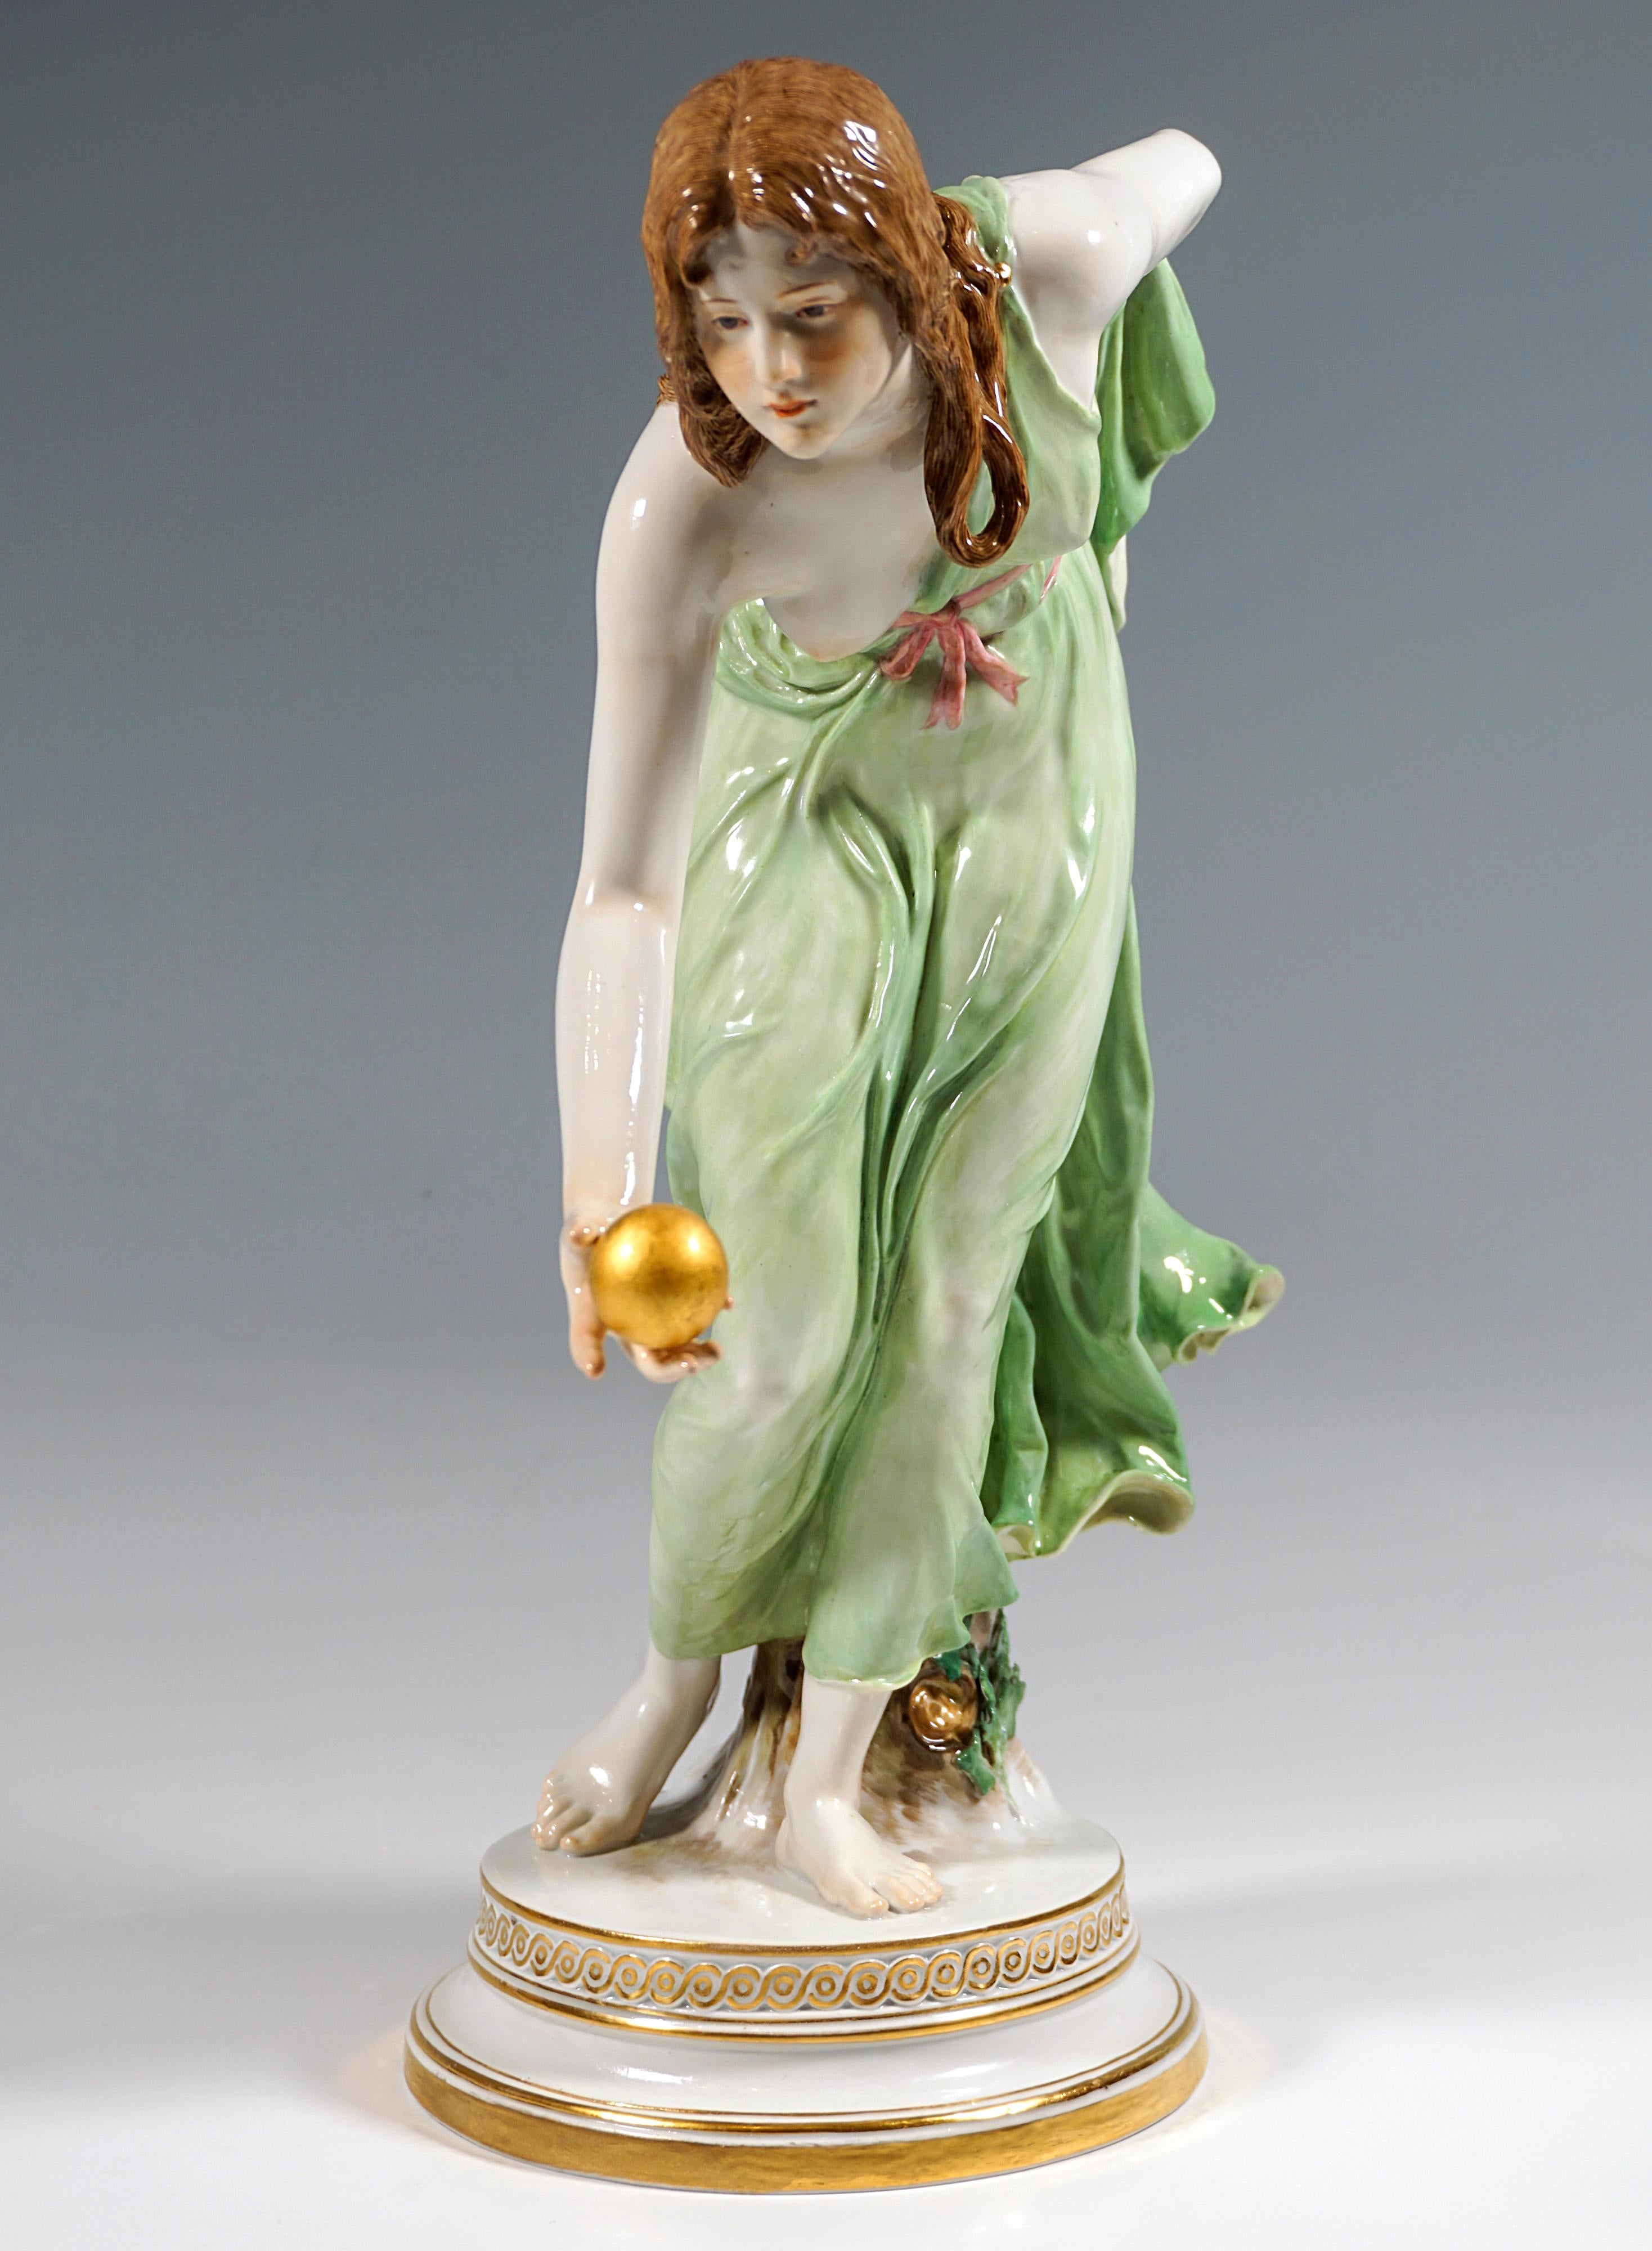 Extremely decorative, fully sculptural representation of an Art Nouveau beauty in a softly falling robe, tilted forward to throw a golden ball, with the left forearm holding the back hem of the dress on her back.
The figure is supported by a tree